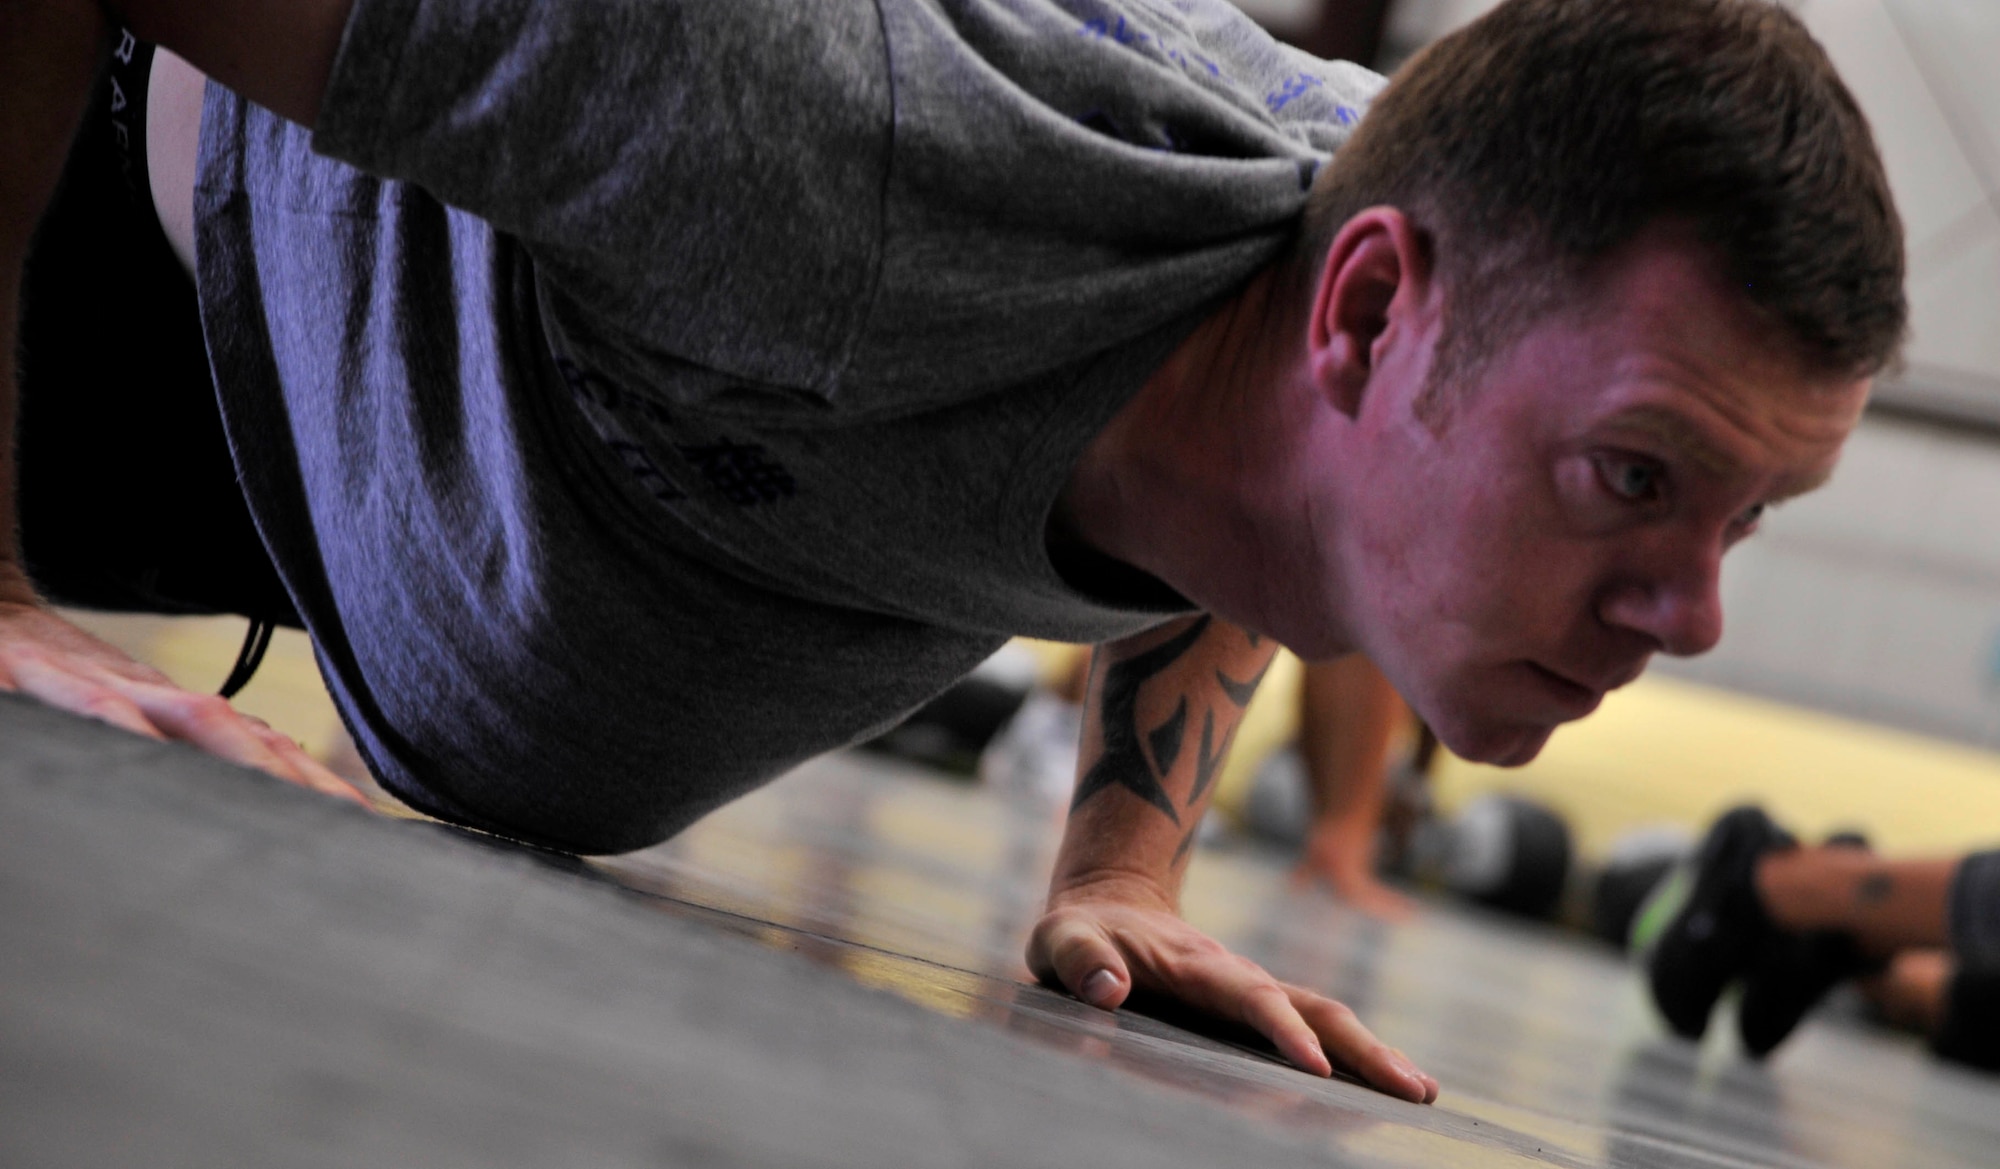 Tech. Sgt. Paul Bro, assigned to the 799th Air Base Squadron, participates in a warm up exercise during a workout at the Life of a Warrior campaign on Creech Air Force Base, Nev., March 28, 2014. Life of a Warrior features many different fitness groups to help improve Airmen fitness and strength. (U.S. Air Force photo by Airman 1st Class C.C./Released)